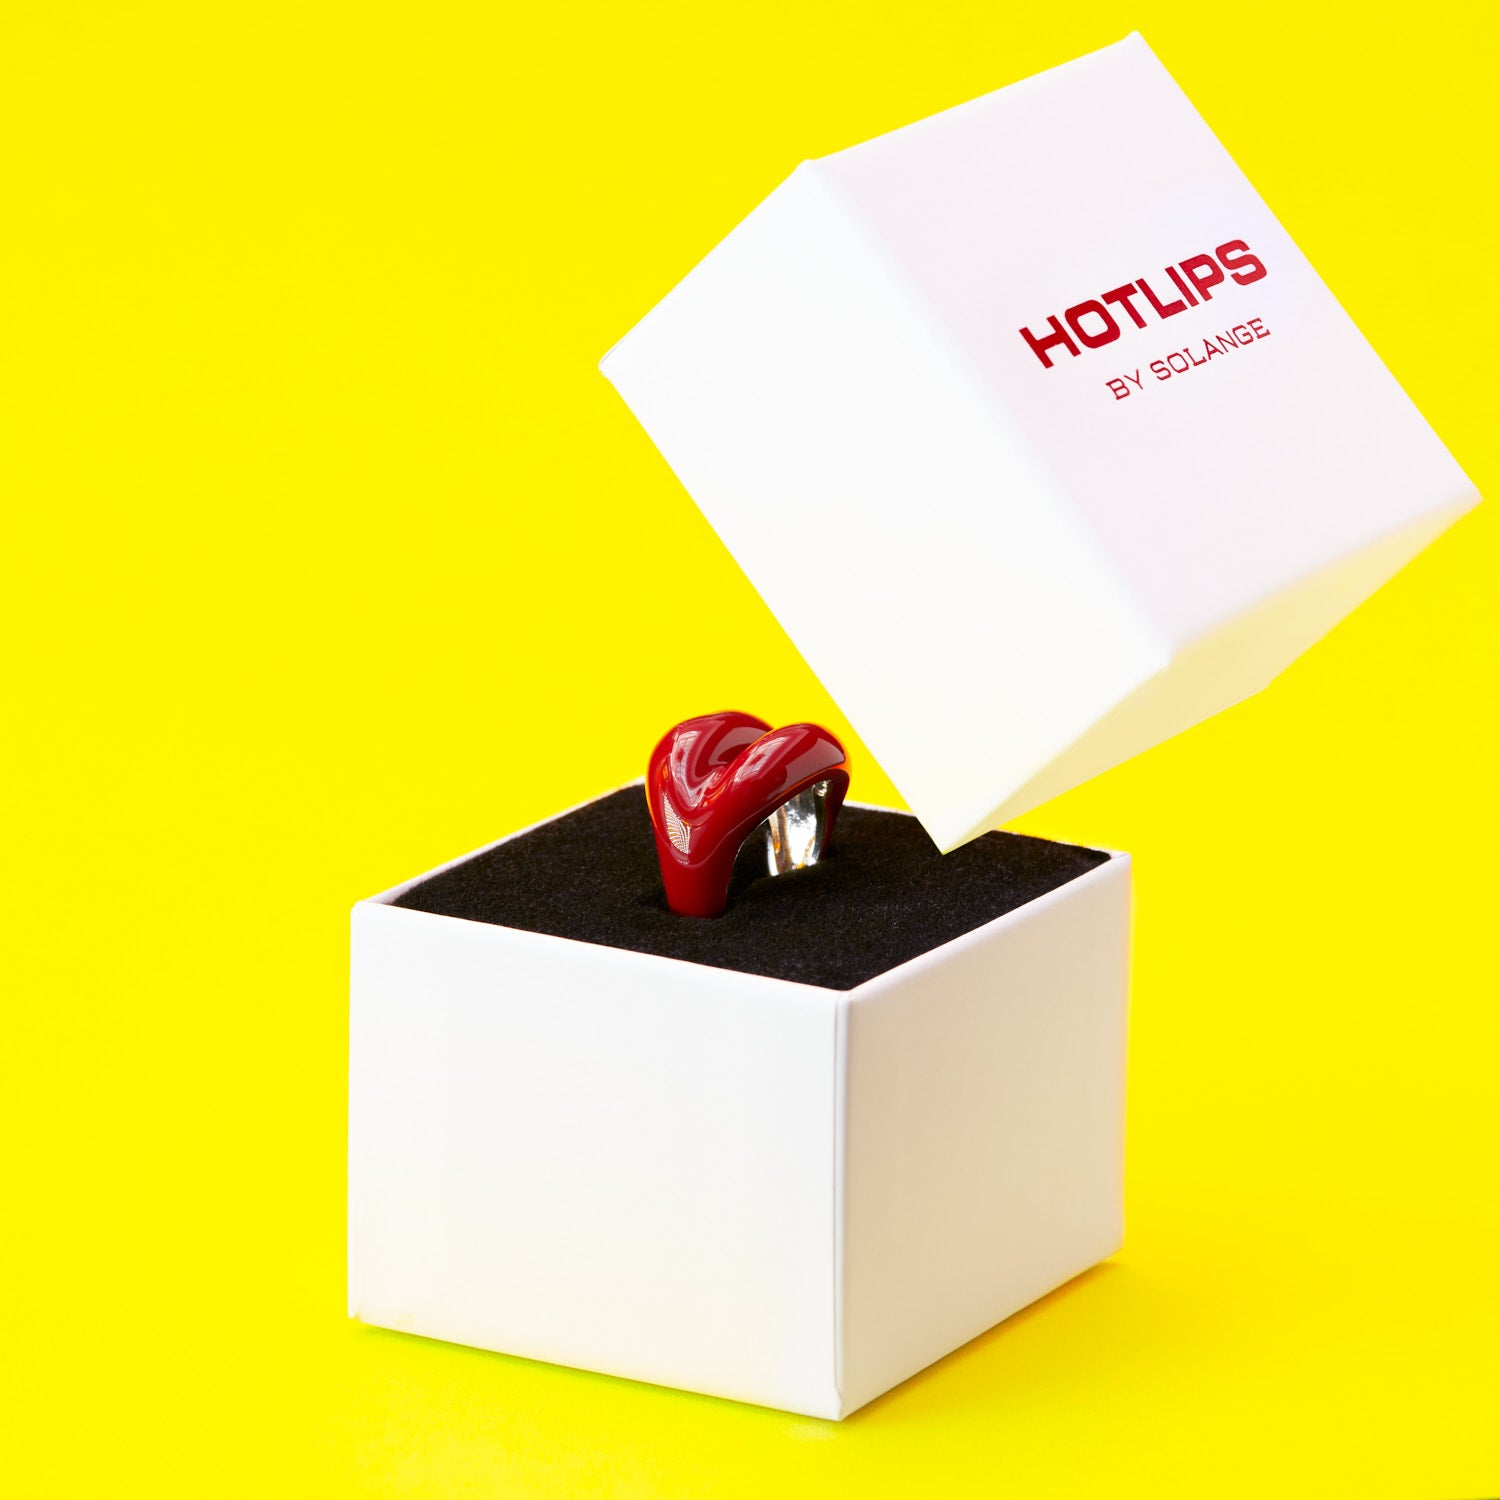 Hotlips Red Ring in Hotlips Box jewellery storage